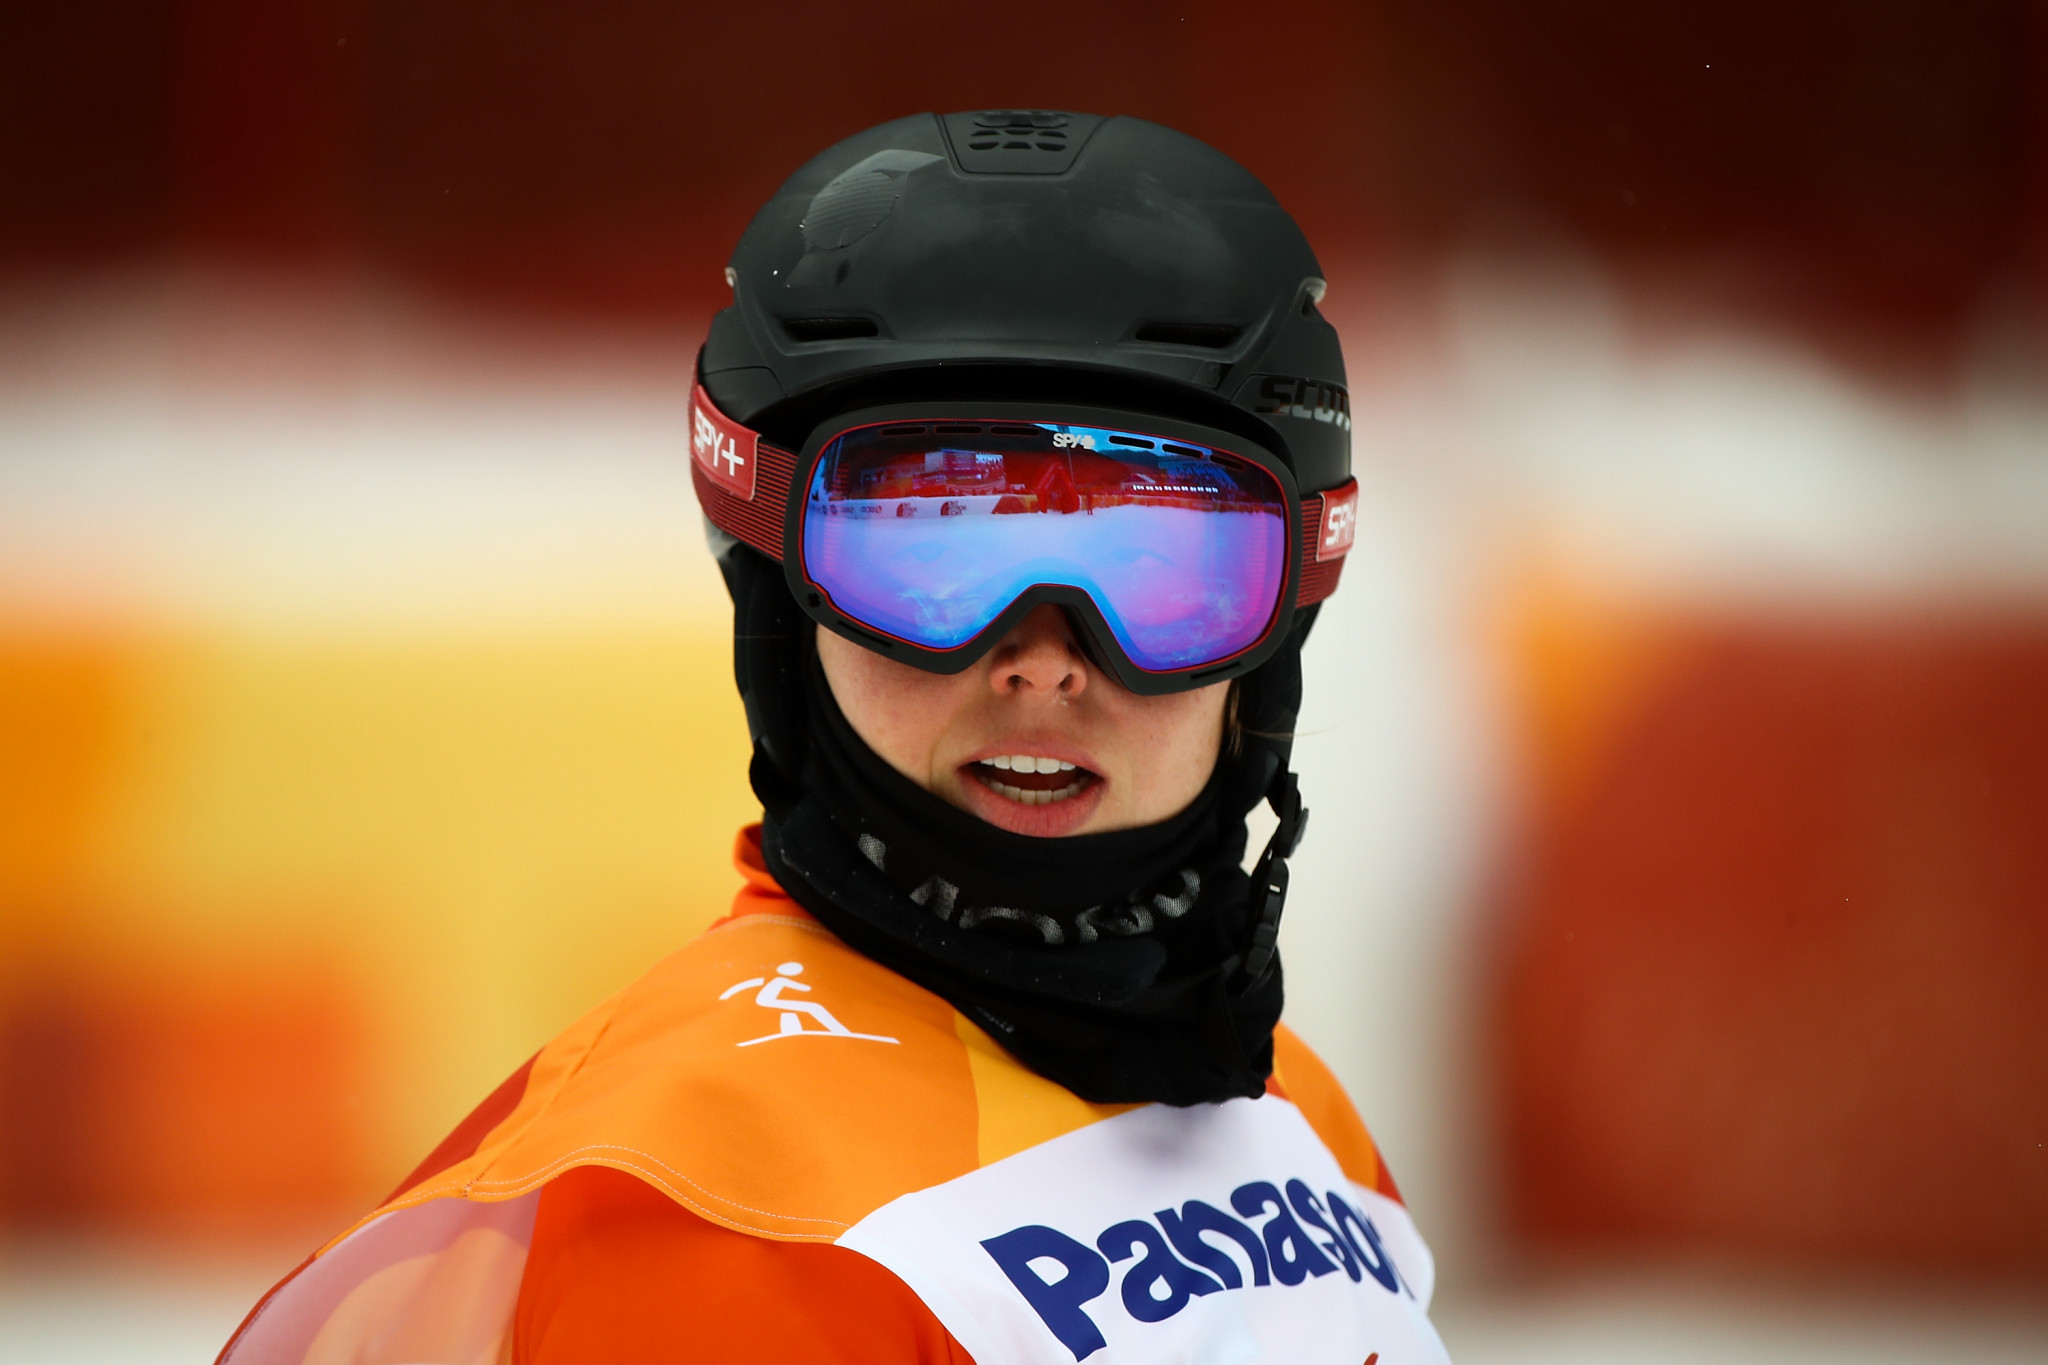 The Netherlands' Lisa Bunschoten won both races she entered in her home World Para Snowboard World Cup in Landgraaf ©Getty Images